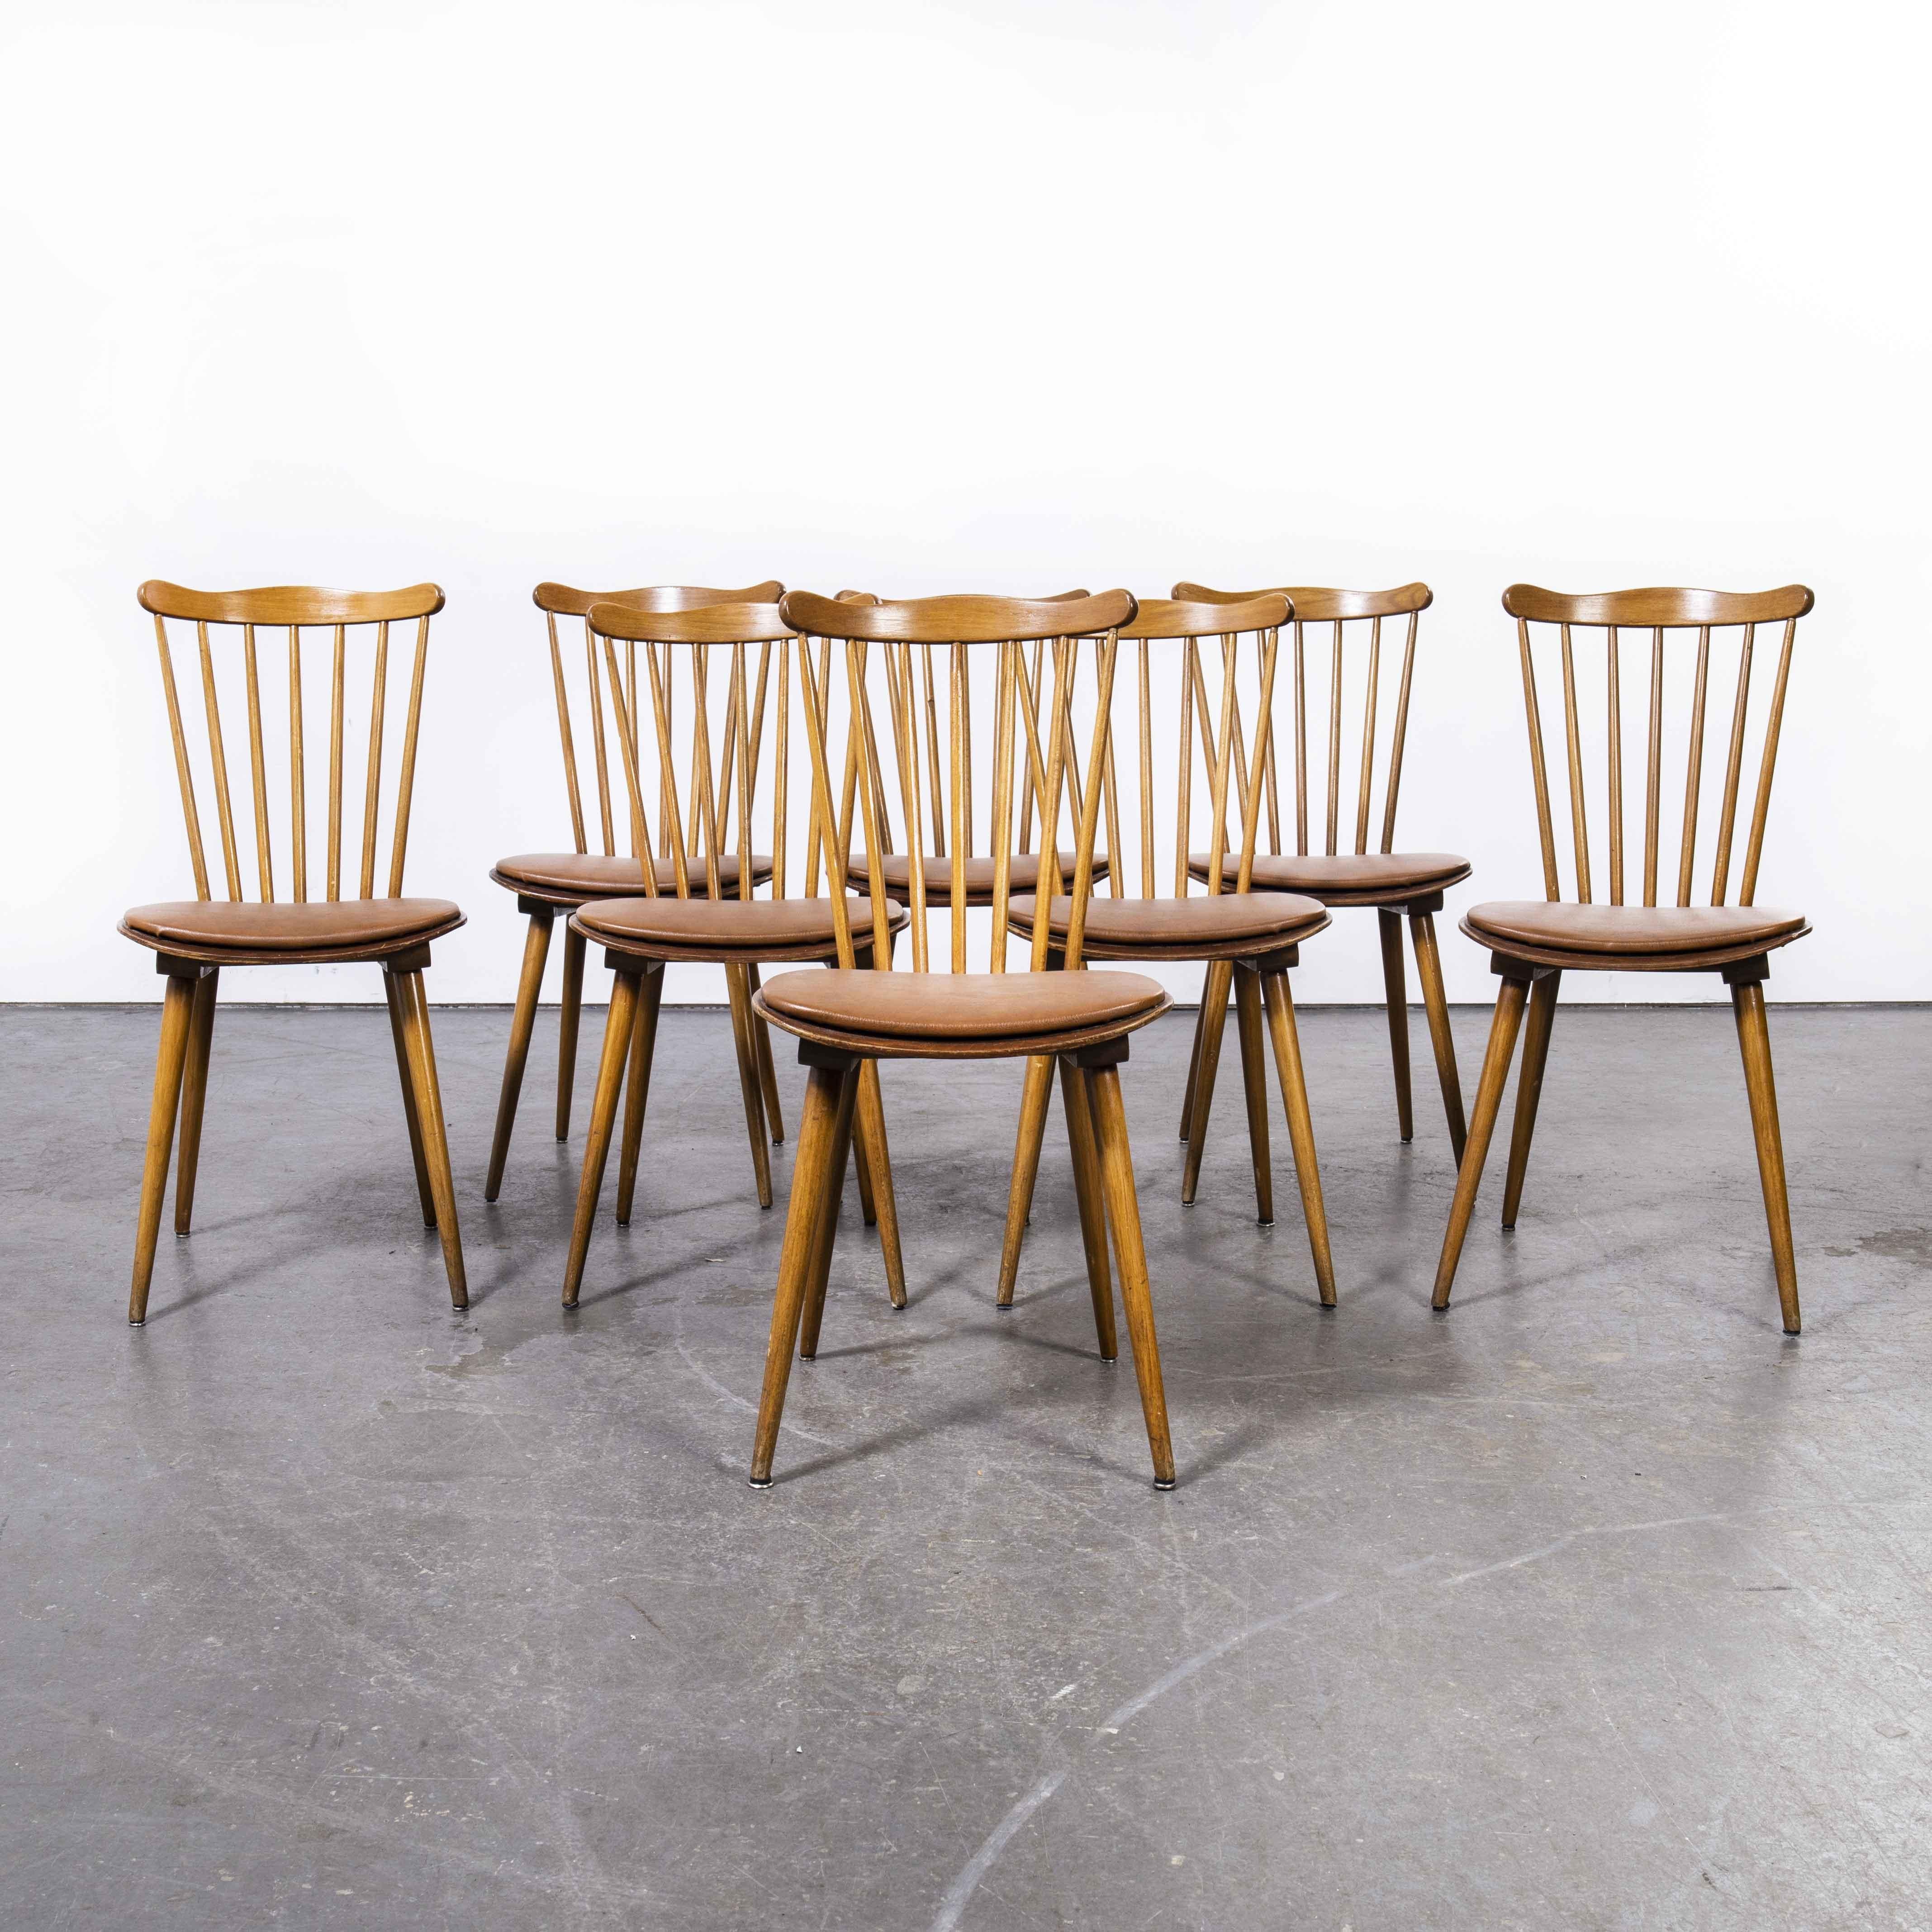 1950’s Baumann bentwood spindleback upholstered dining chair – set of eight brown

1950’s Baumann bentwood spindleback upholstered dining chair – set of eight brown. Classic beech spindle back chair made in France by the maker Baumann. Baumann is